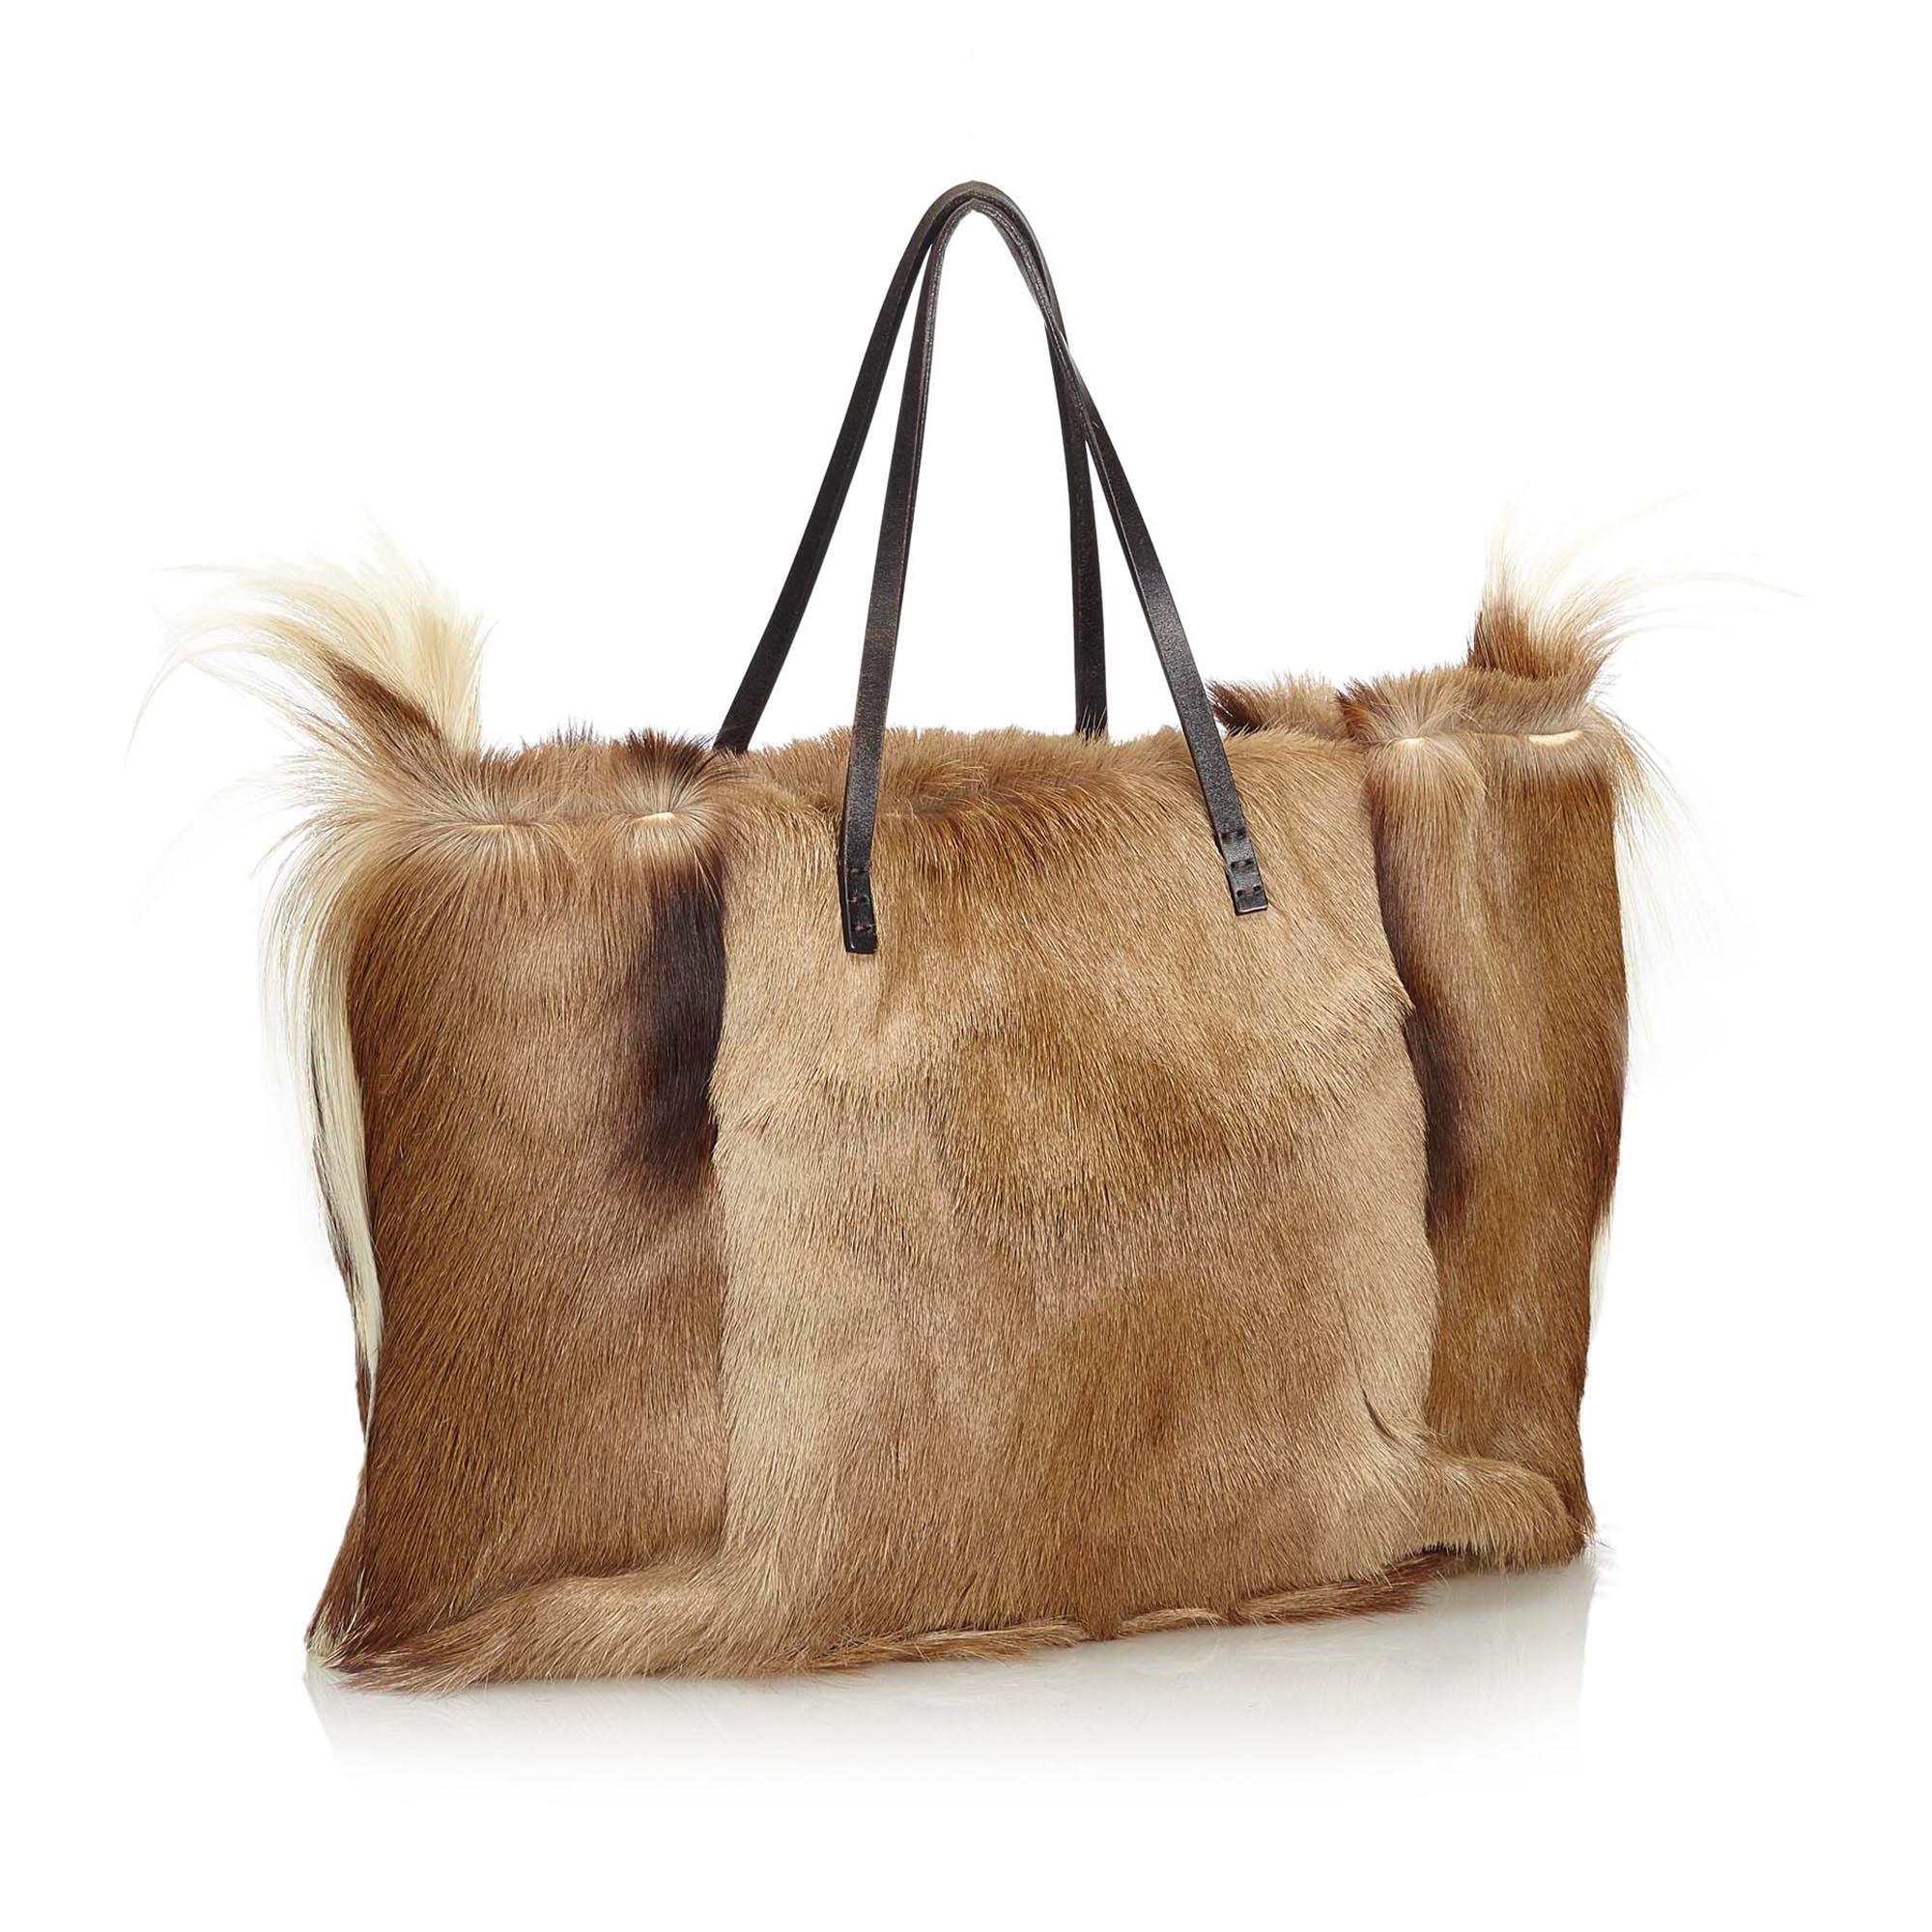 This tote bag features a fur body, flat leather straps, an open top with a magnetic closure, and an interior zip pocket. It carries as AB condition rating.

Inclusions: 
This item does not come with inclusions.

Dimensions:
Length: 28.00 cm
Width: